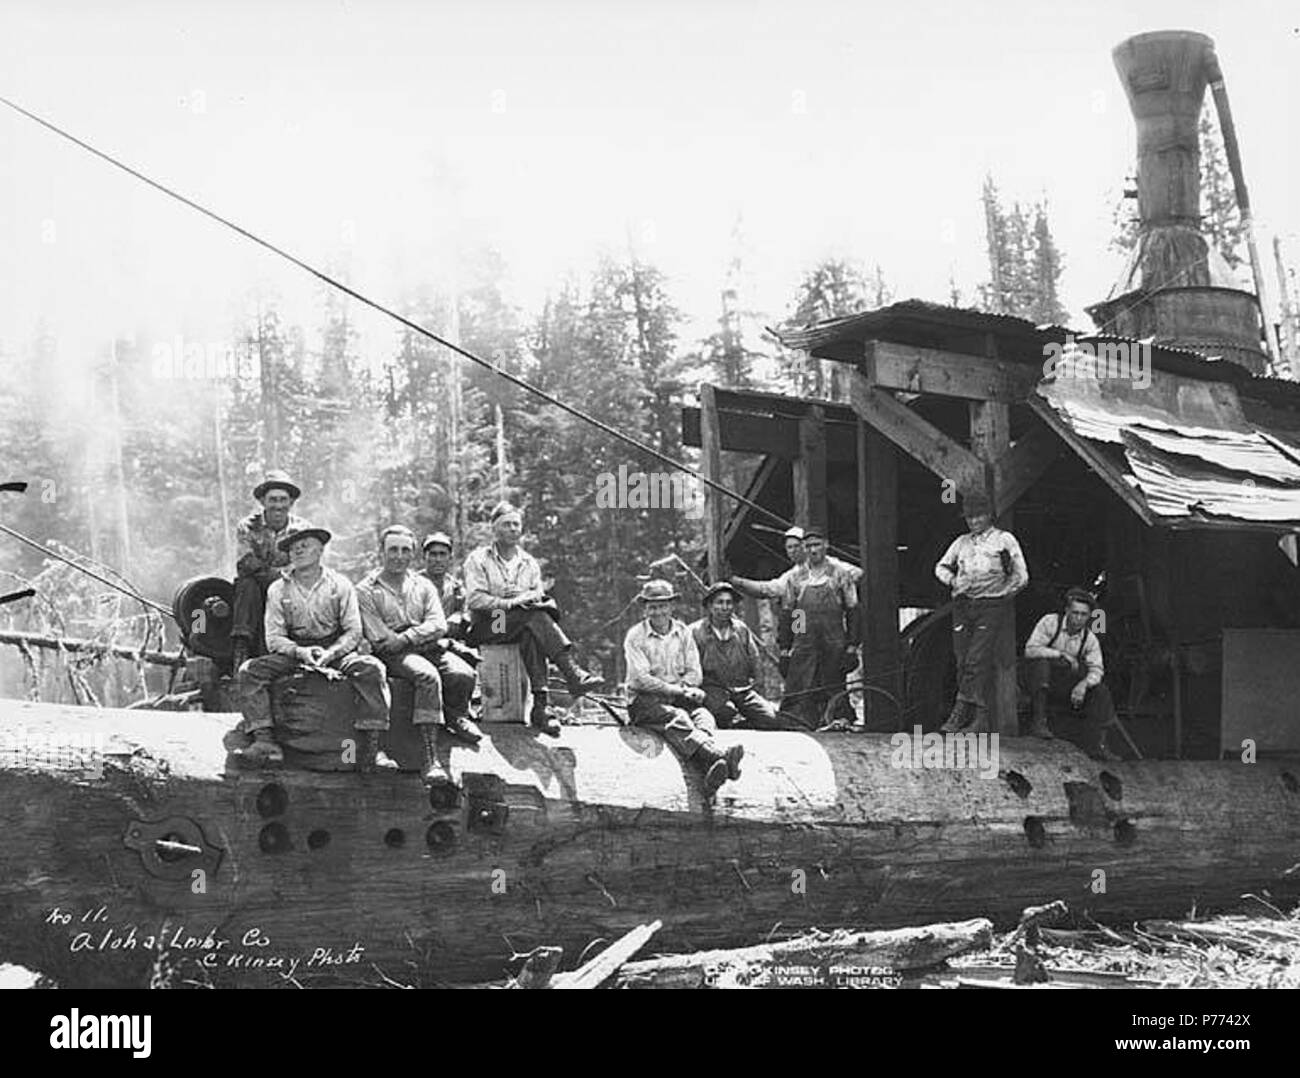 . English: Logging crew and donkey engine, Aloha Lumber Co., ca. 1921 . English: Caption on image: Aloha Lumber Co. C. Kinsey Photo. No. 11 PH Coll 516.23 Aloha was once home to Aloha Mill and Shake Company. It is located two miles east of the Pacific Ocean on Beaver Creek in west central Grays Harbor County. It was founded by R. D. Emerson and W. H. Dole in 1905. The name, a Hawaiian greeting, was chosen by members of the Dole family, who were landowners and business people in Hawaii. In 1920, Aloha Mill & Lumber Co. successfully bid on a unit of timber near Moclips, six miles away from its m Stock Photo